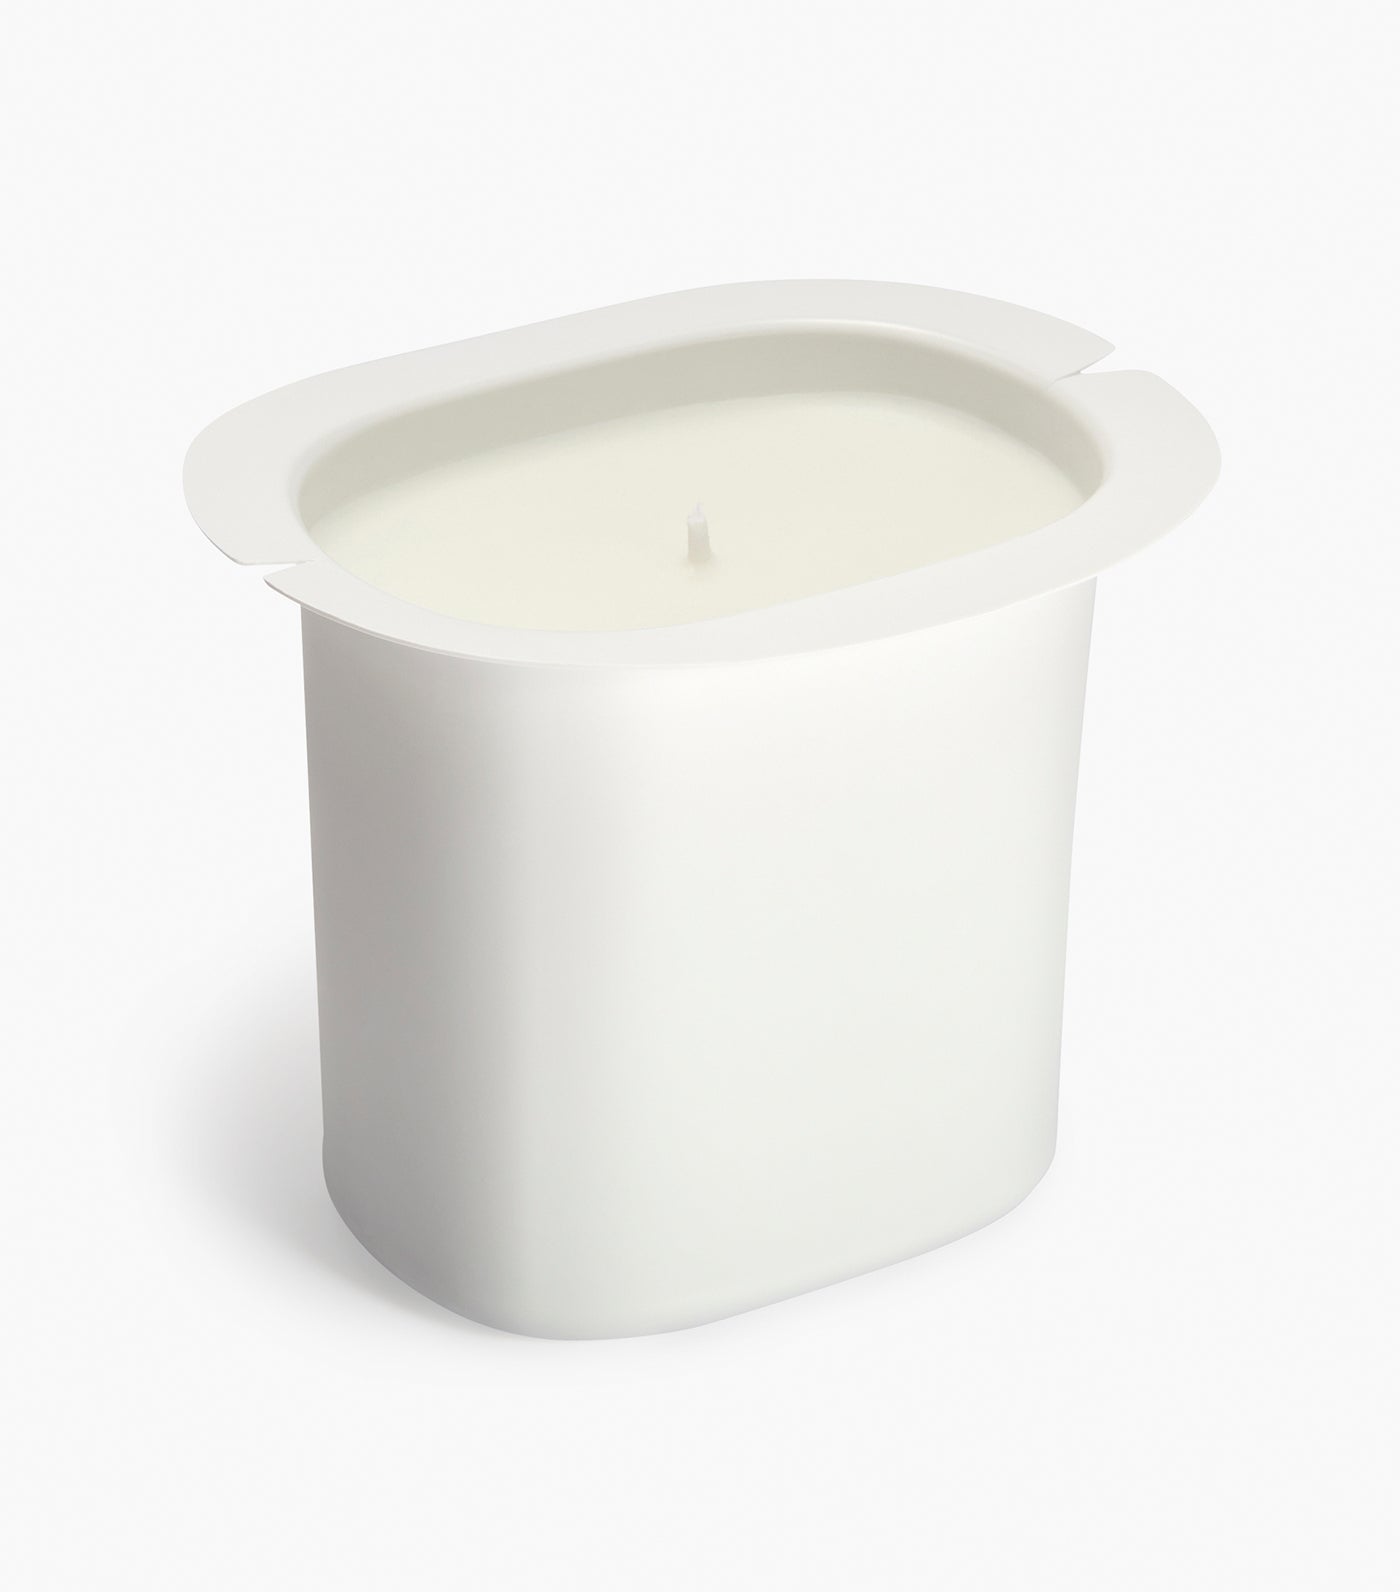 La Vallée du Temps (Valley Of Time) Candle Refill